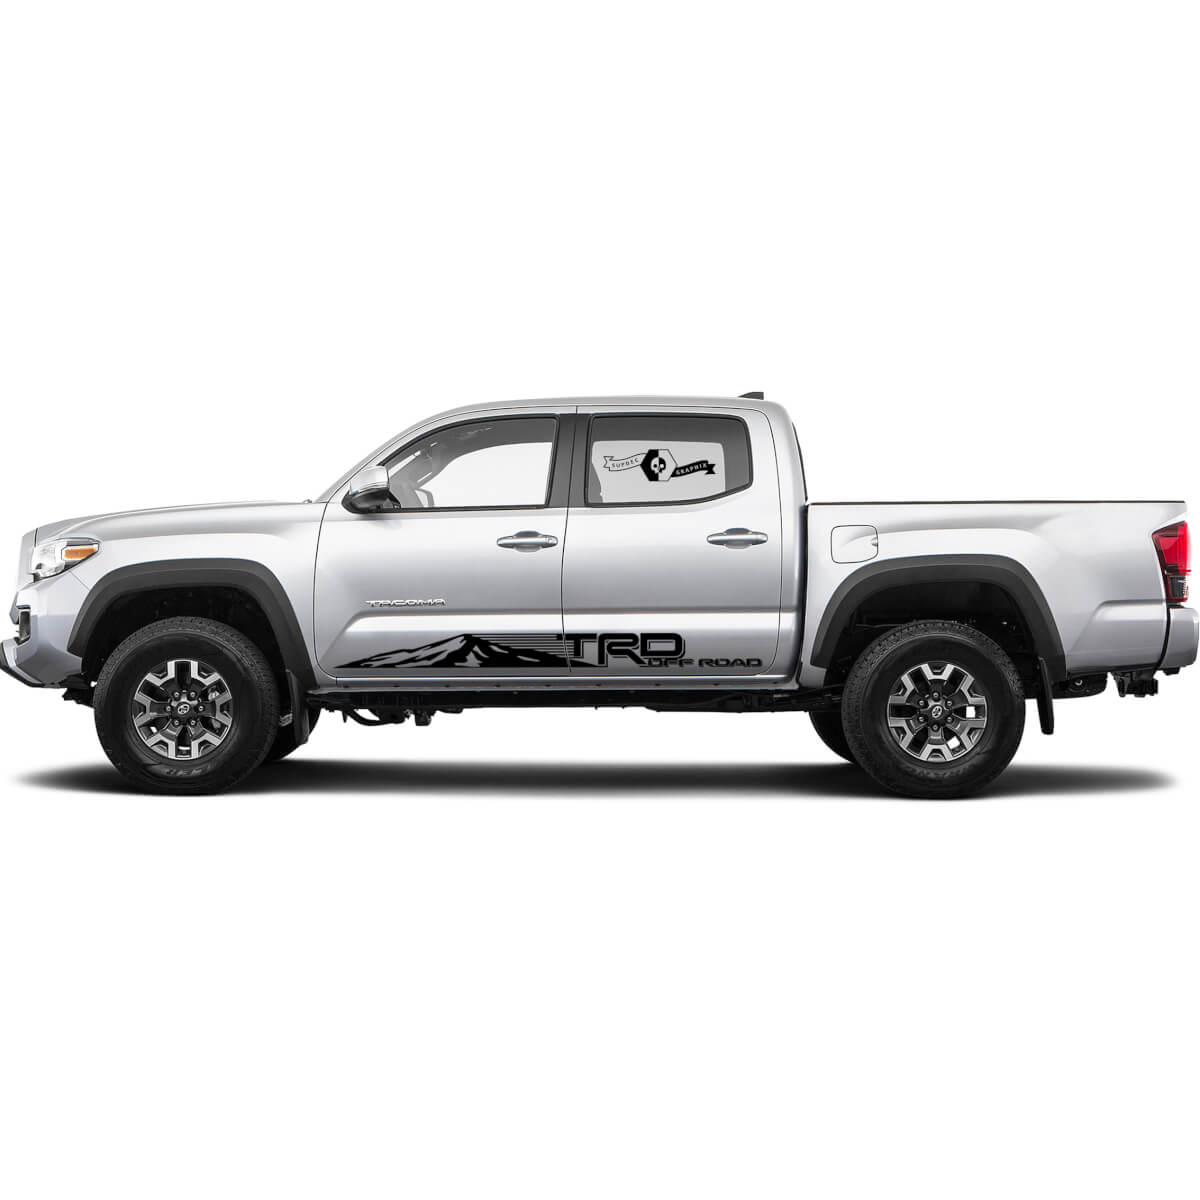 TRD off road Mountains Style for Side Rocker Panel Truck Decals Stickers for Tacoma Tundra Hilux 4Runner 4